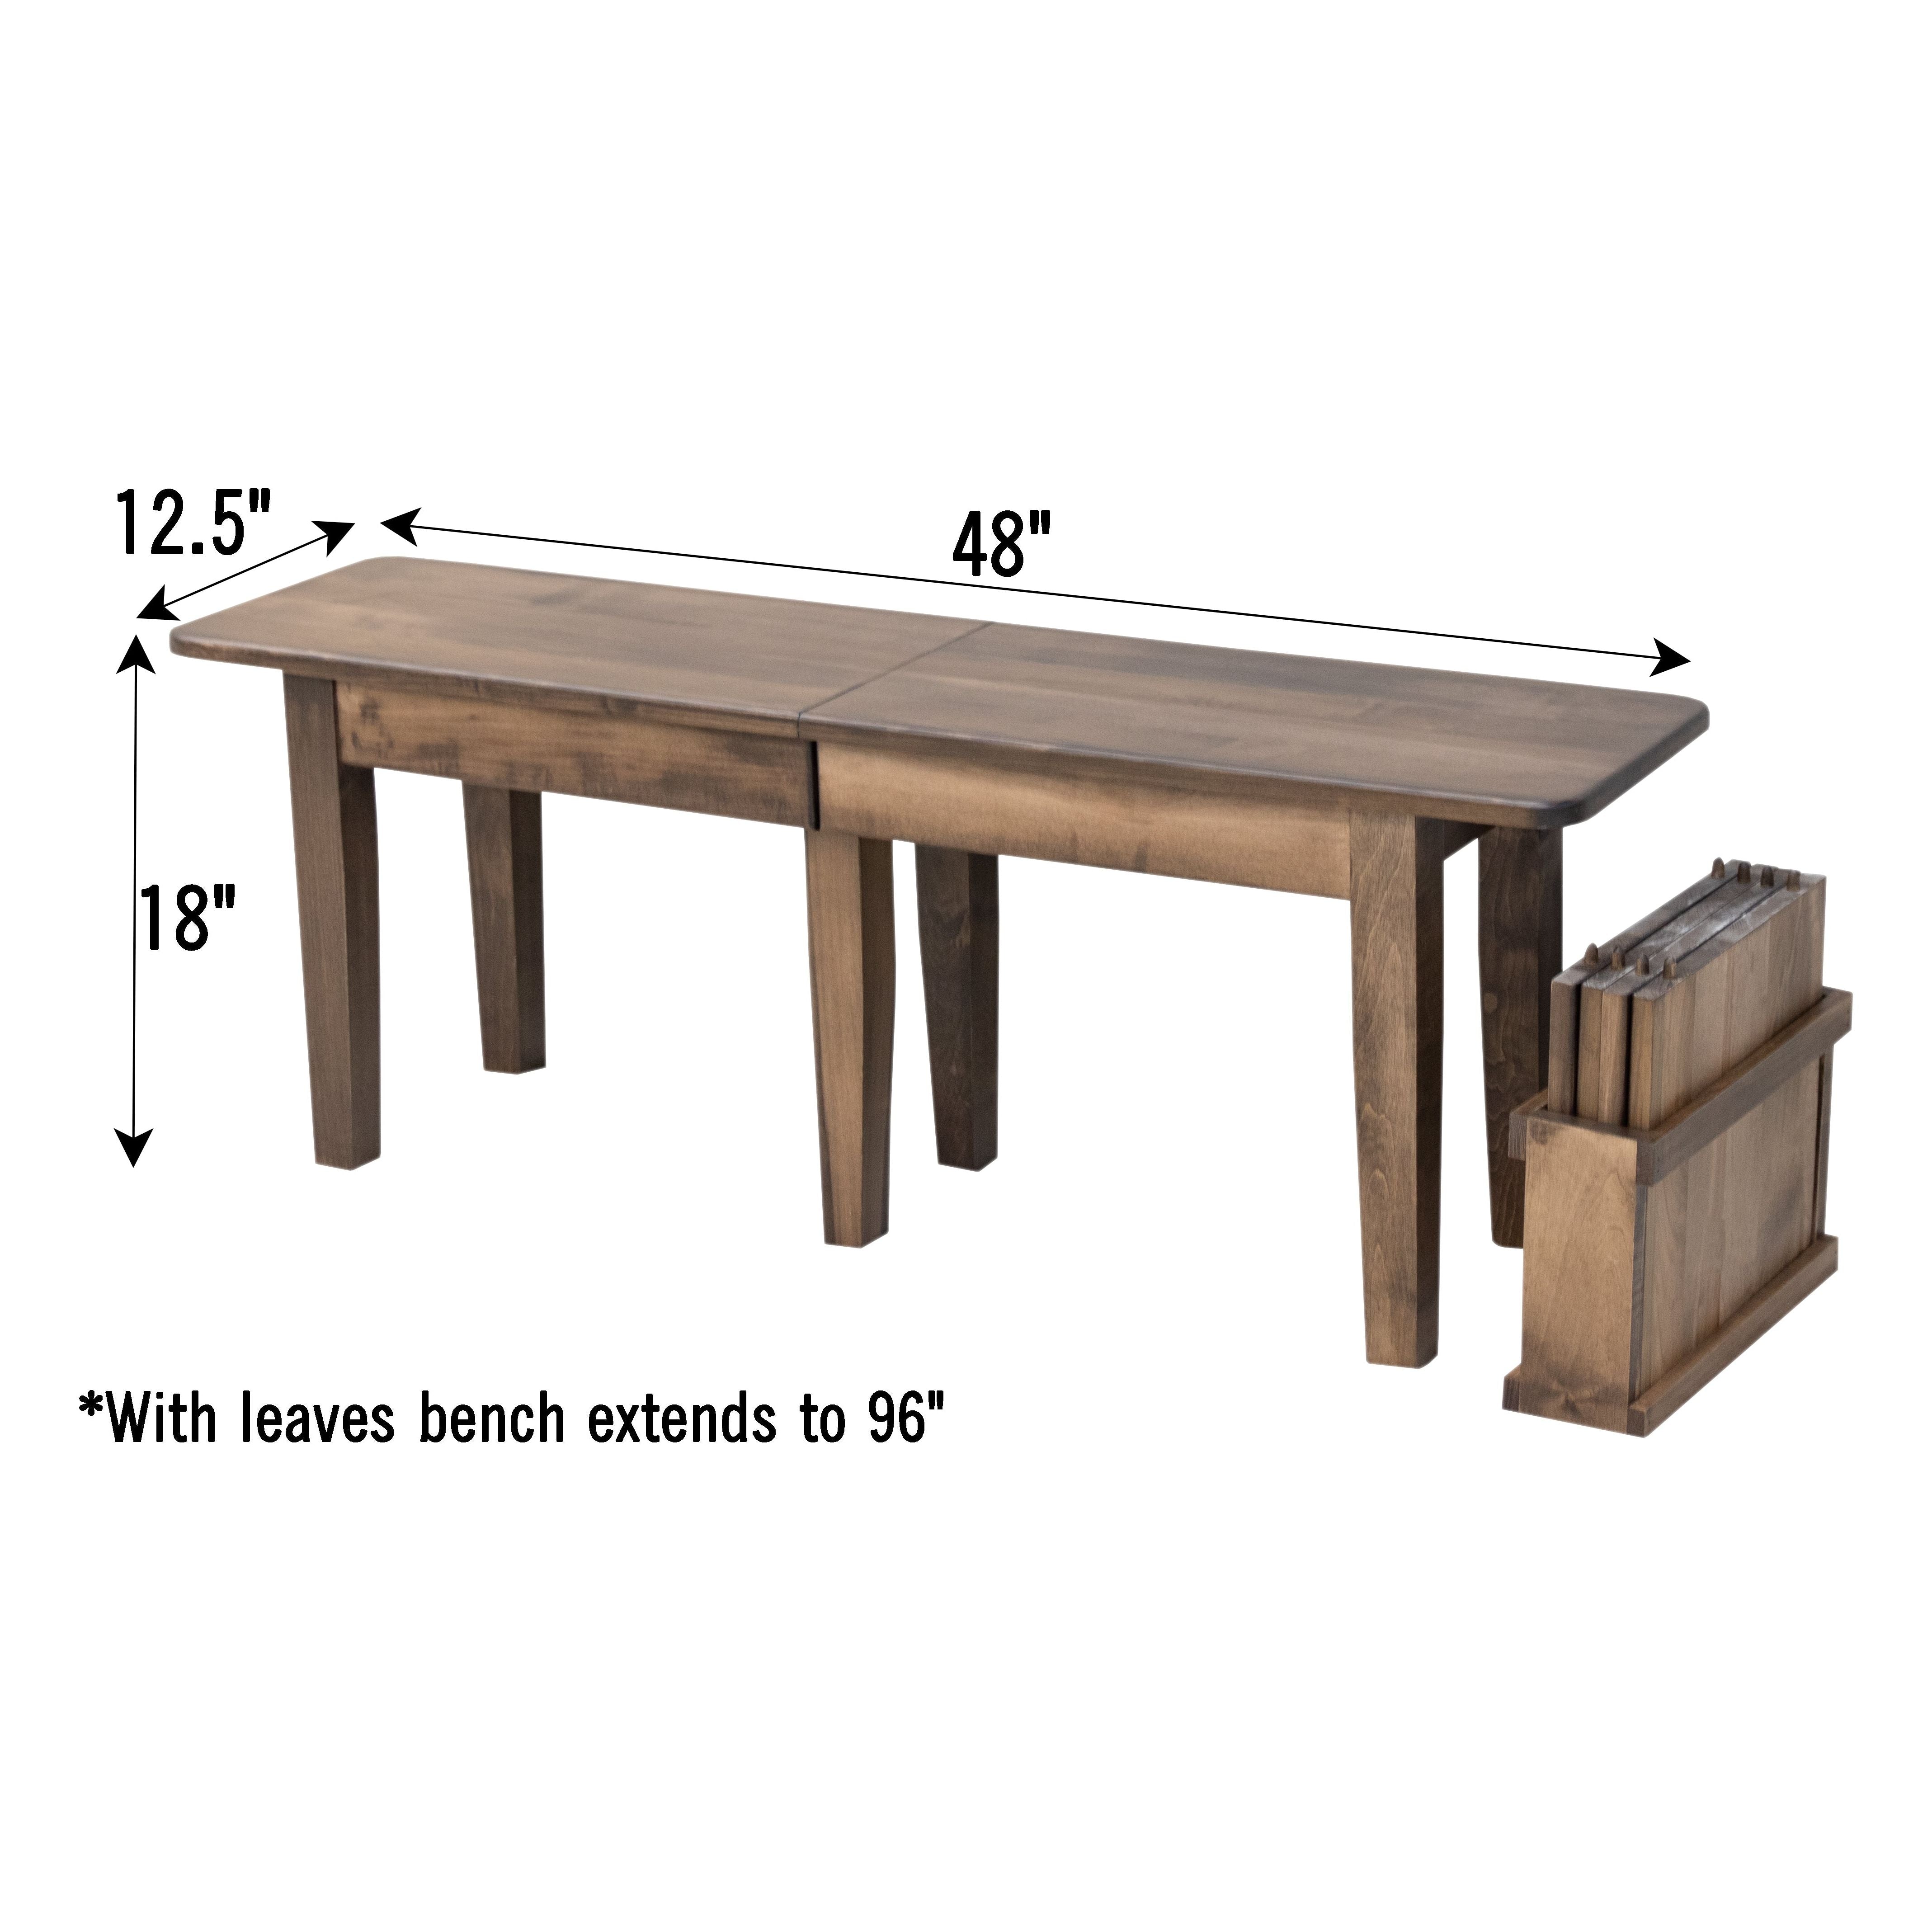 Shaker Expandable Bench, 4' to 8'